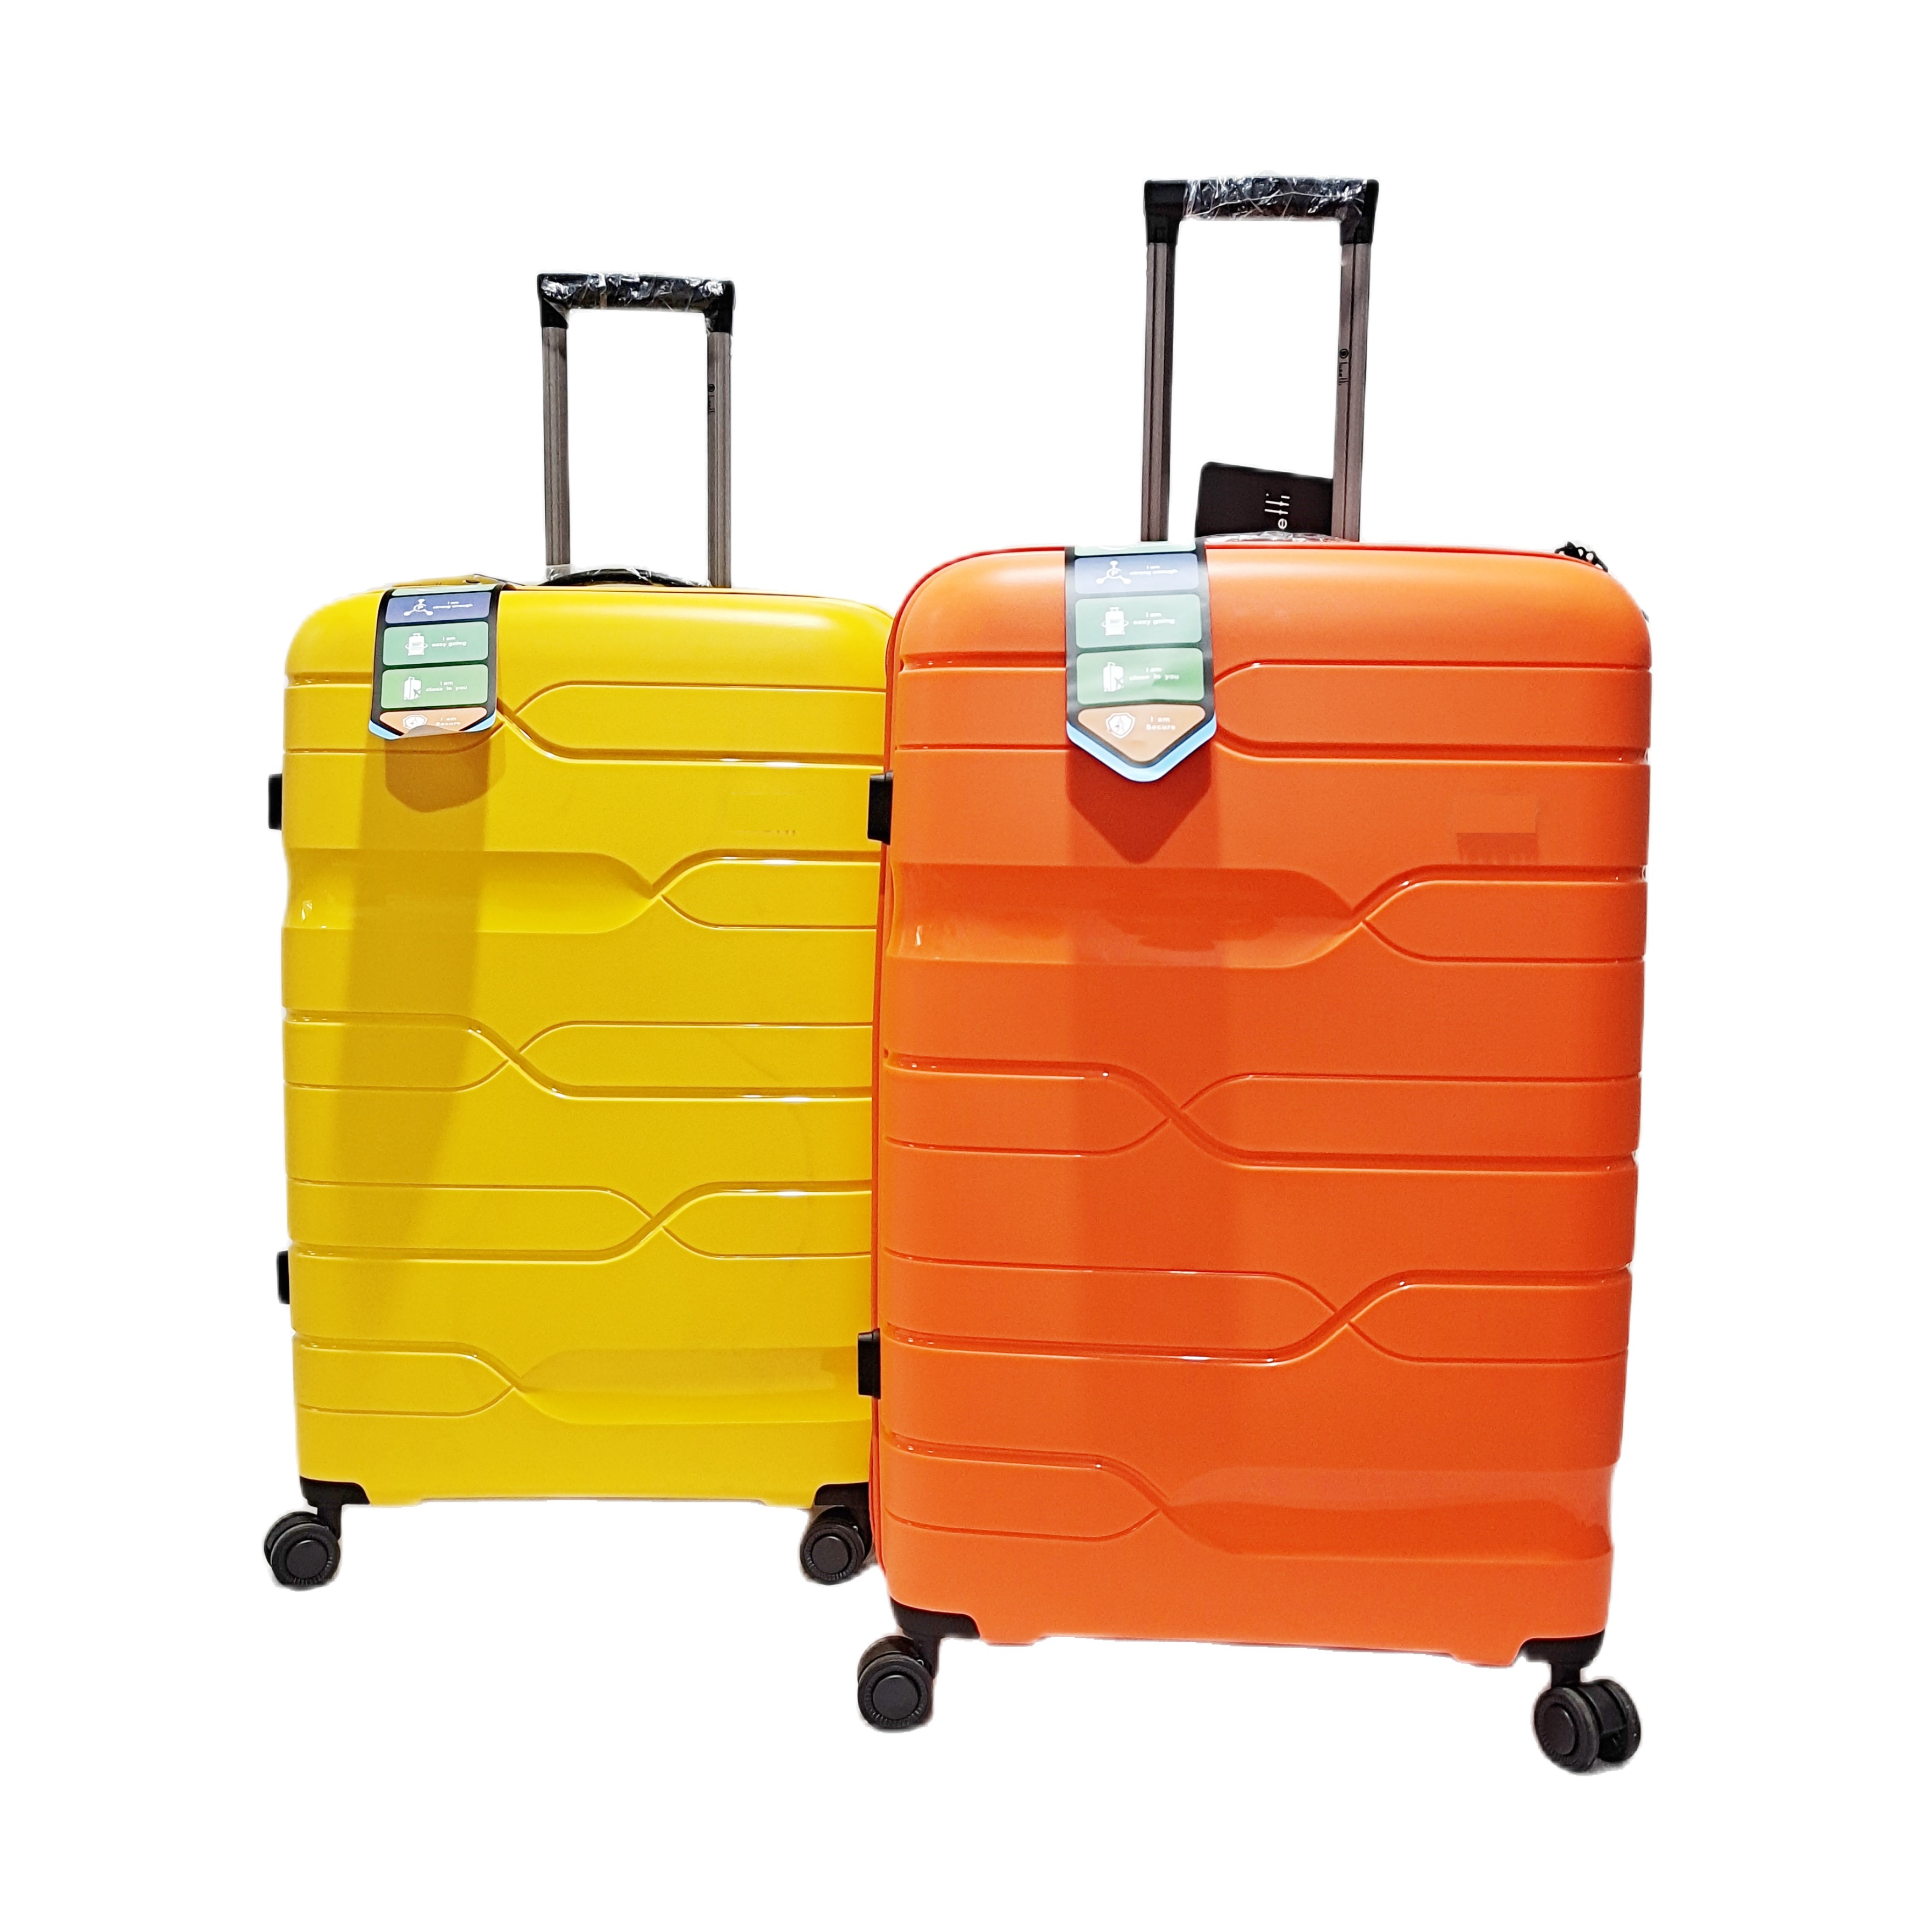 PP Travel Luggage Set Lightweight Carry on Suit Case